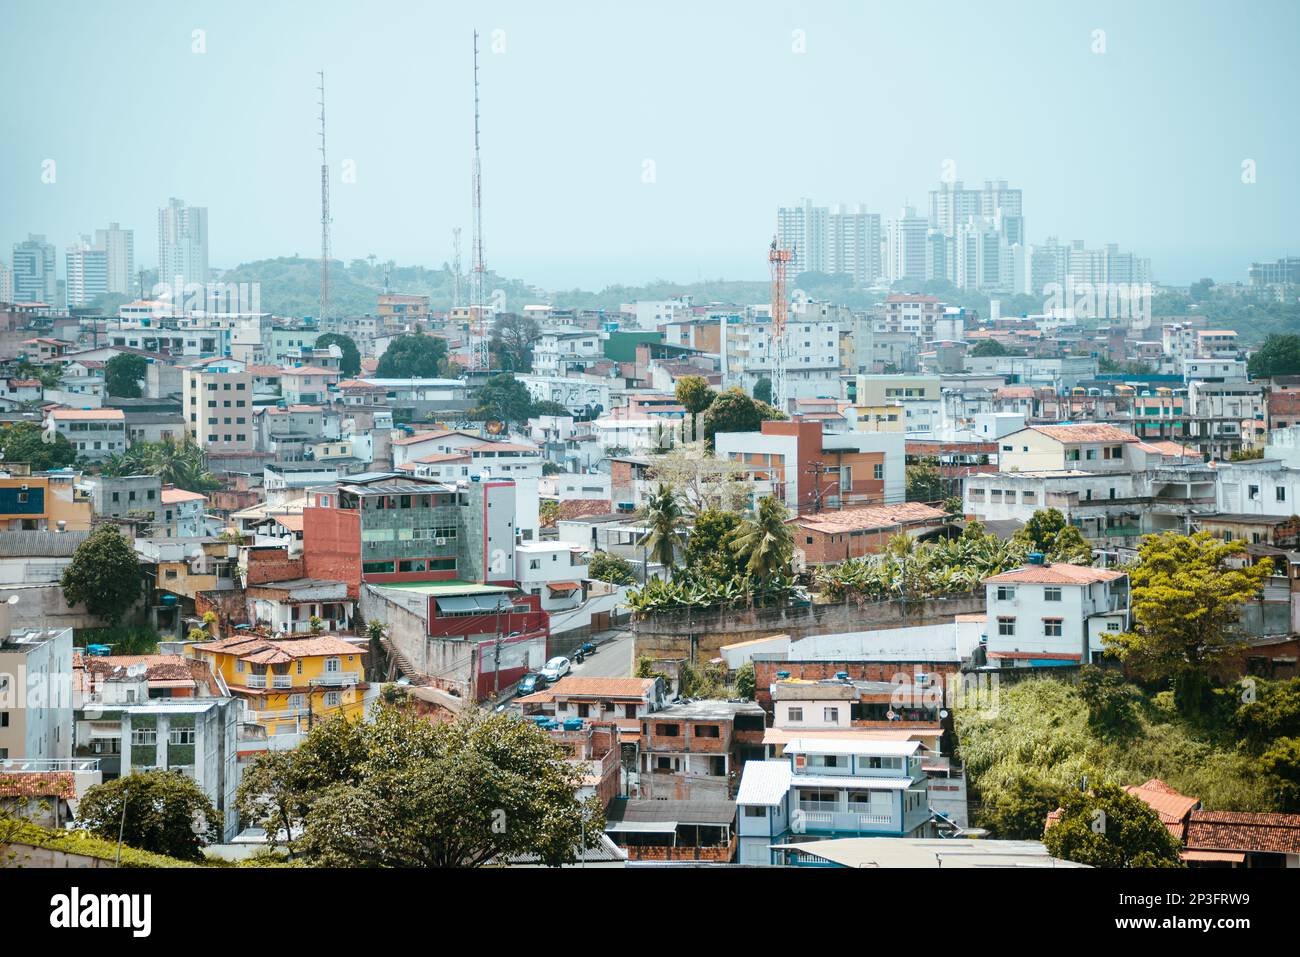 Salvador, Bahia, Brazil - September 24, 2022: Distant and panoramic view of houses and residential buildings in the neighborhood of Pernambues in Salv Stock Photo